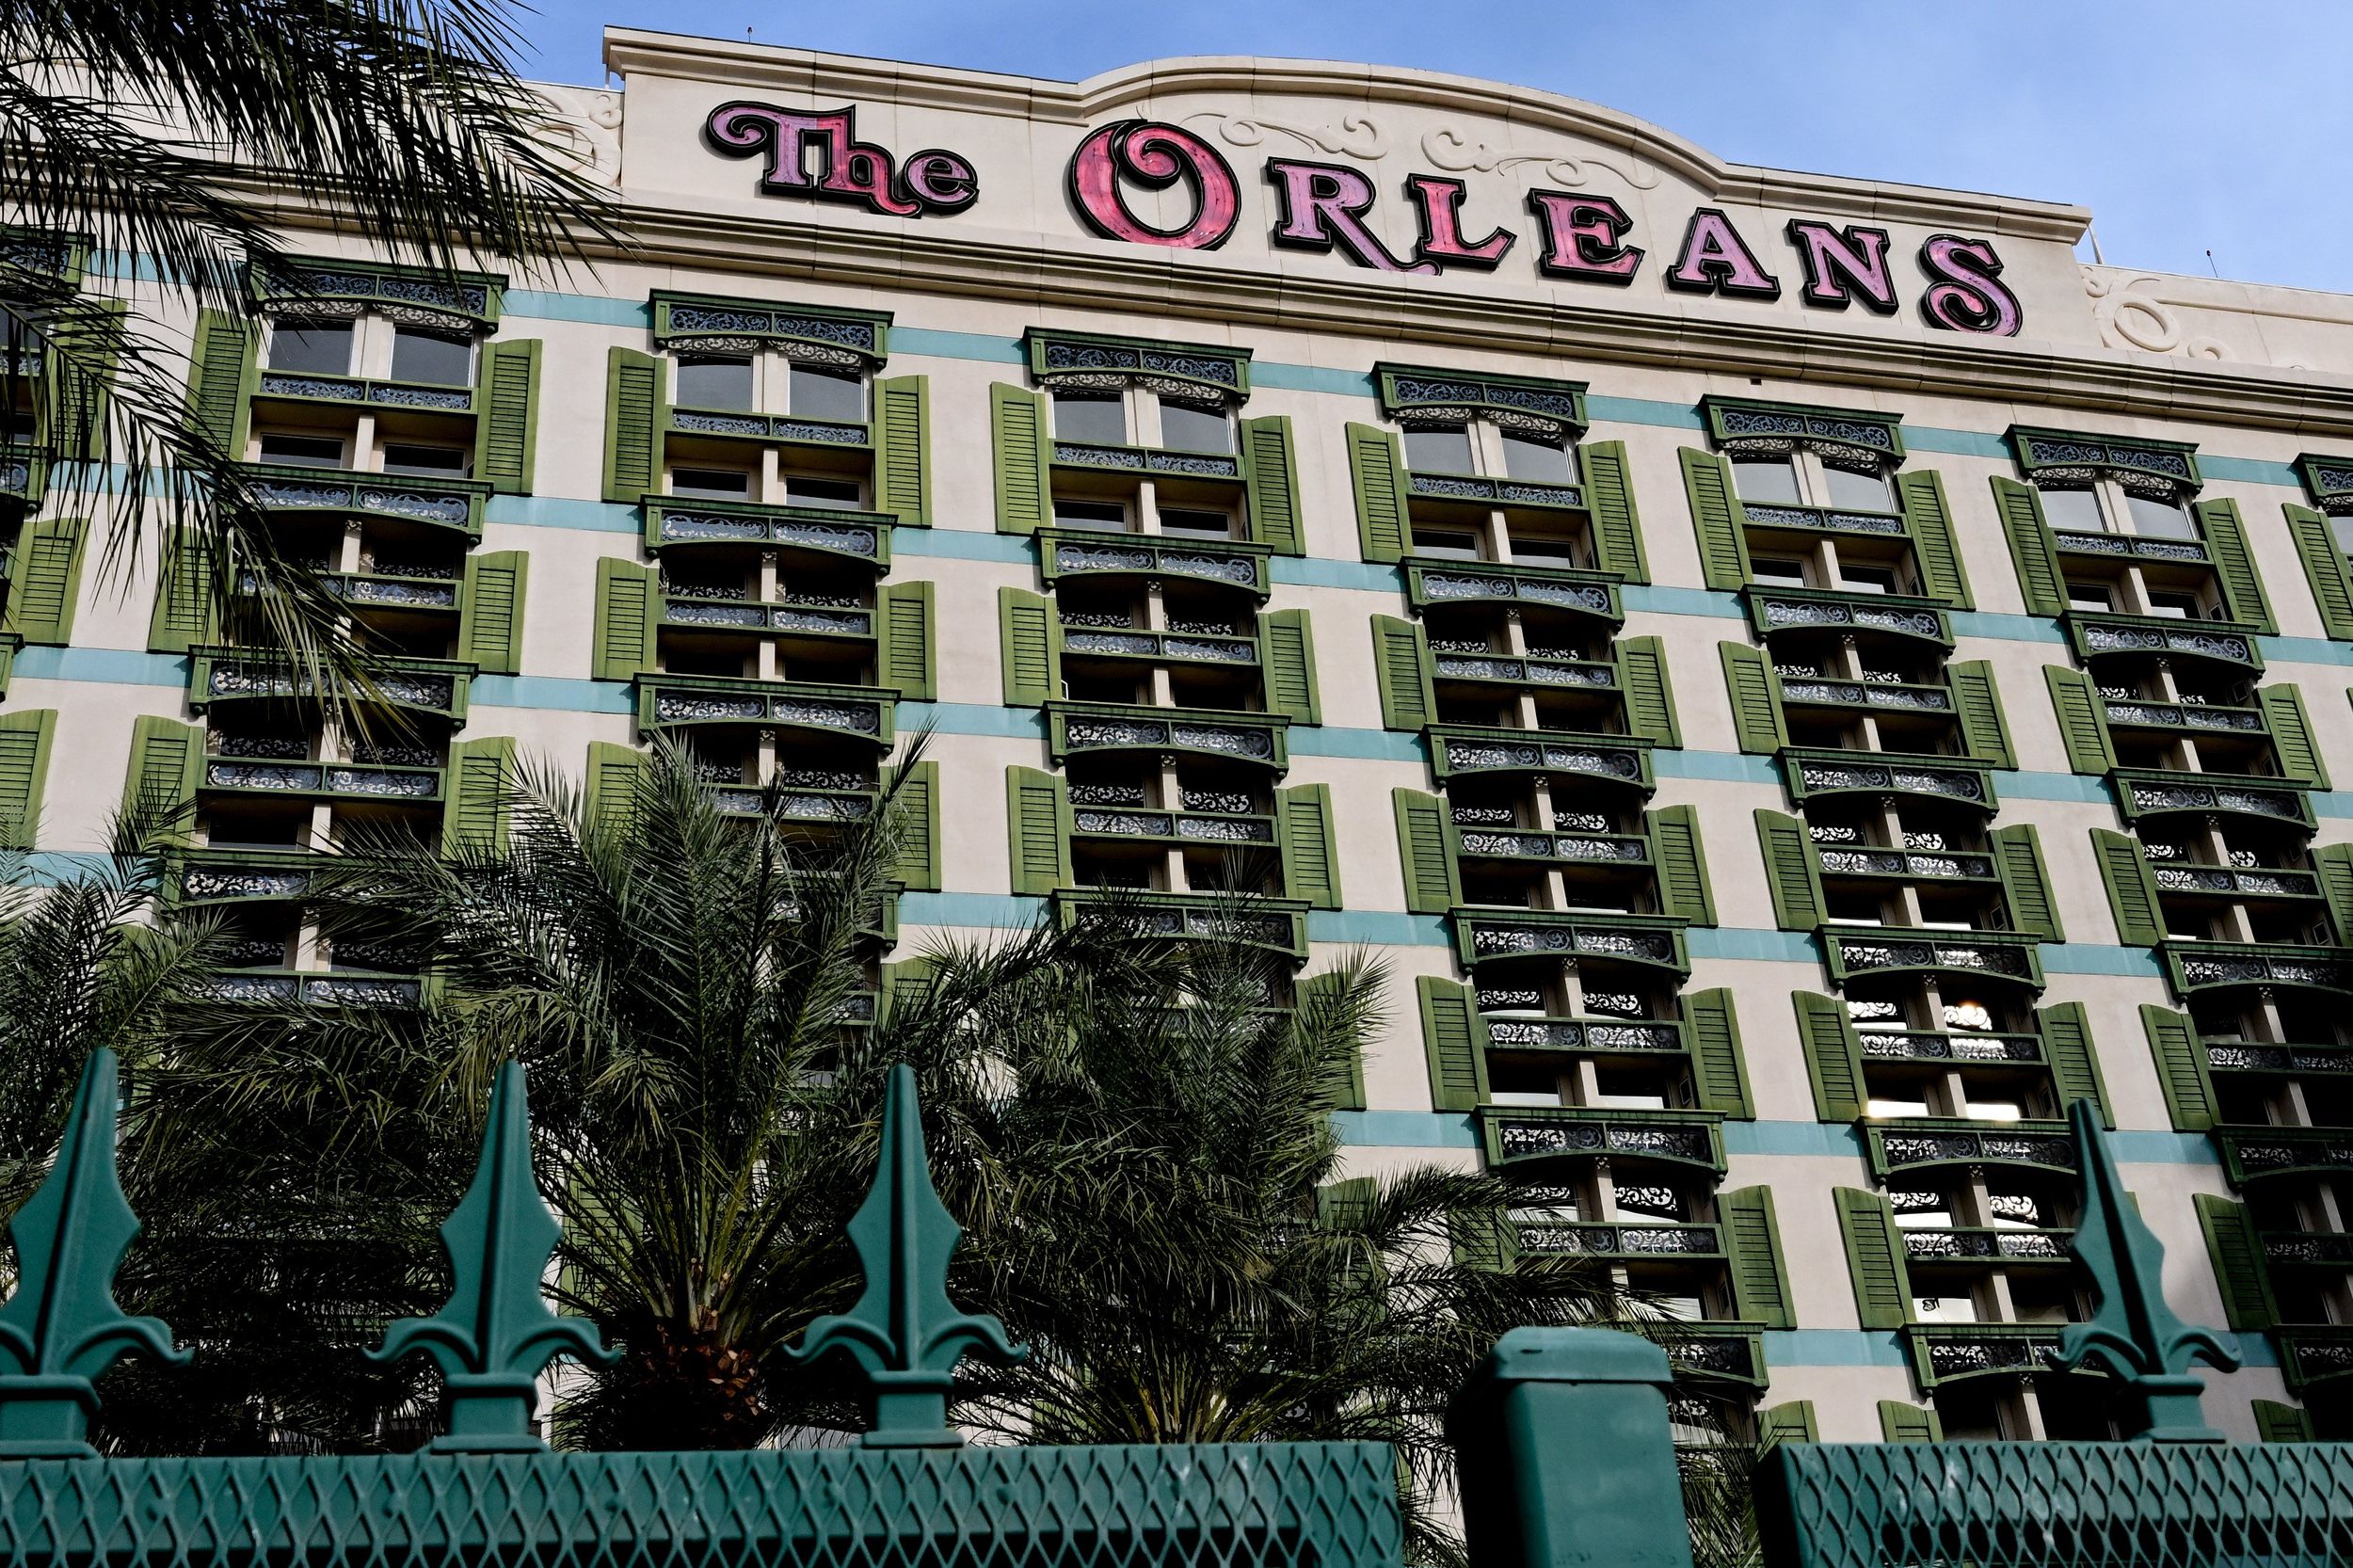 Las Vegas hotels investigated after cases of Legionnaires' disease